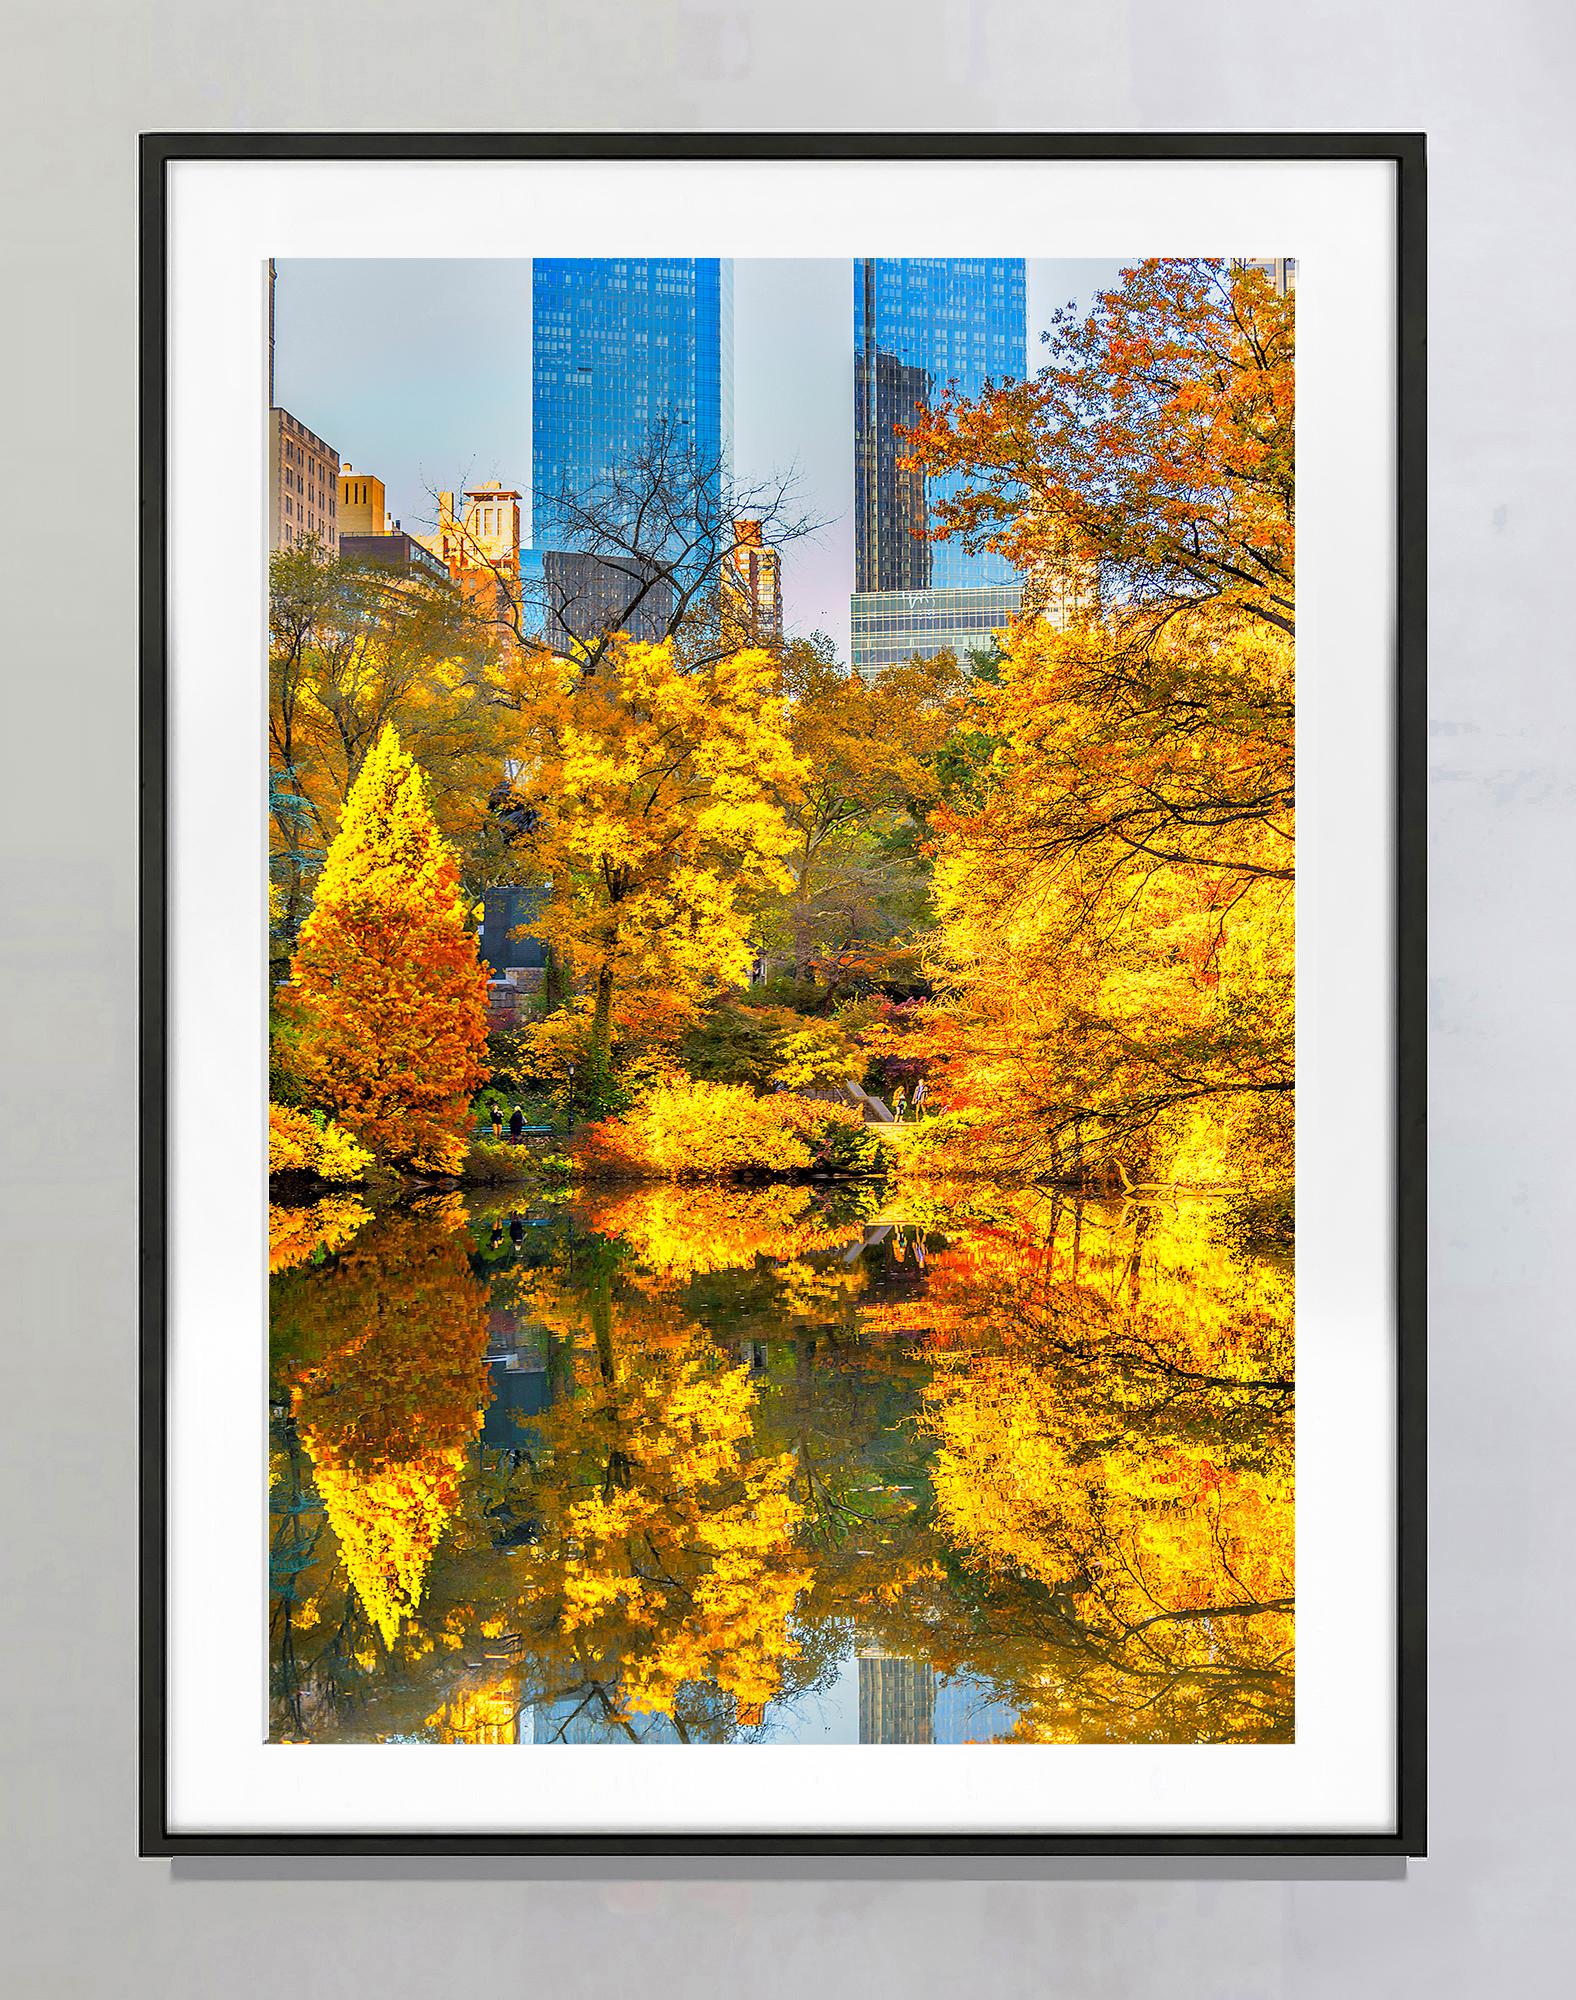 Nature Photography in the City. Central Park's Autumn foliage is transformed into a delightful abstract pattern where natural organic shapes interact with the architectonic shapes of the surrounding skyscrapers.  Fine Art Photographer Mitchell Funk